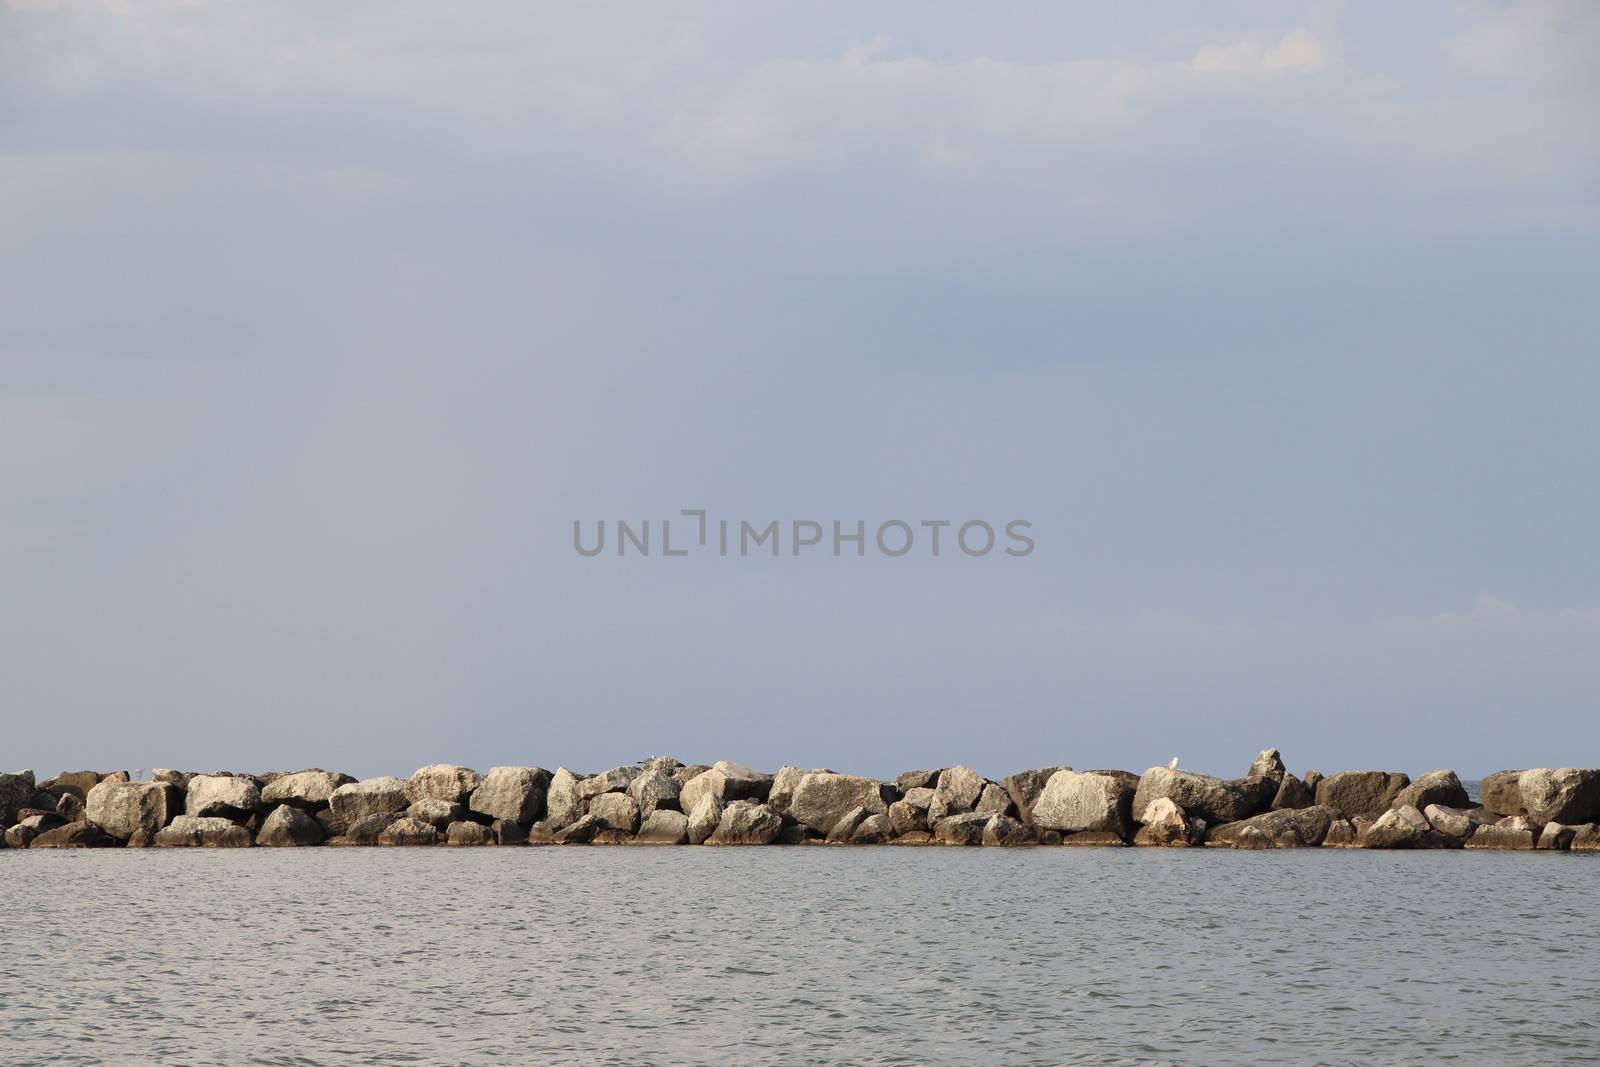 Rocks to protect the coast in the Adriatic sea in Italy